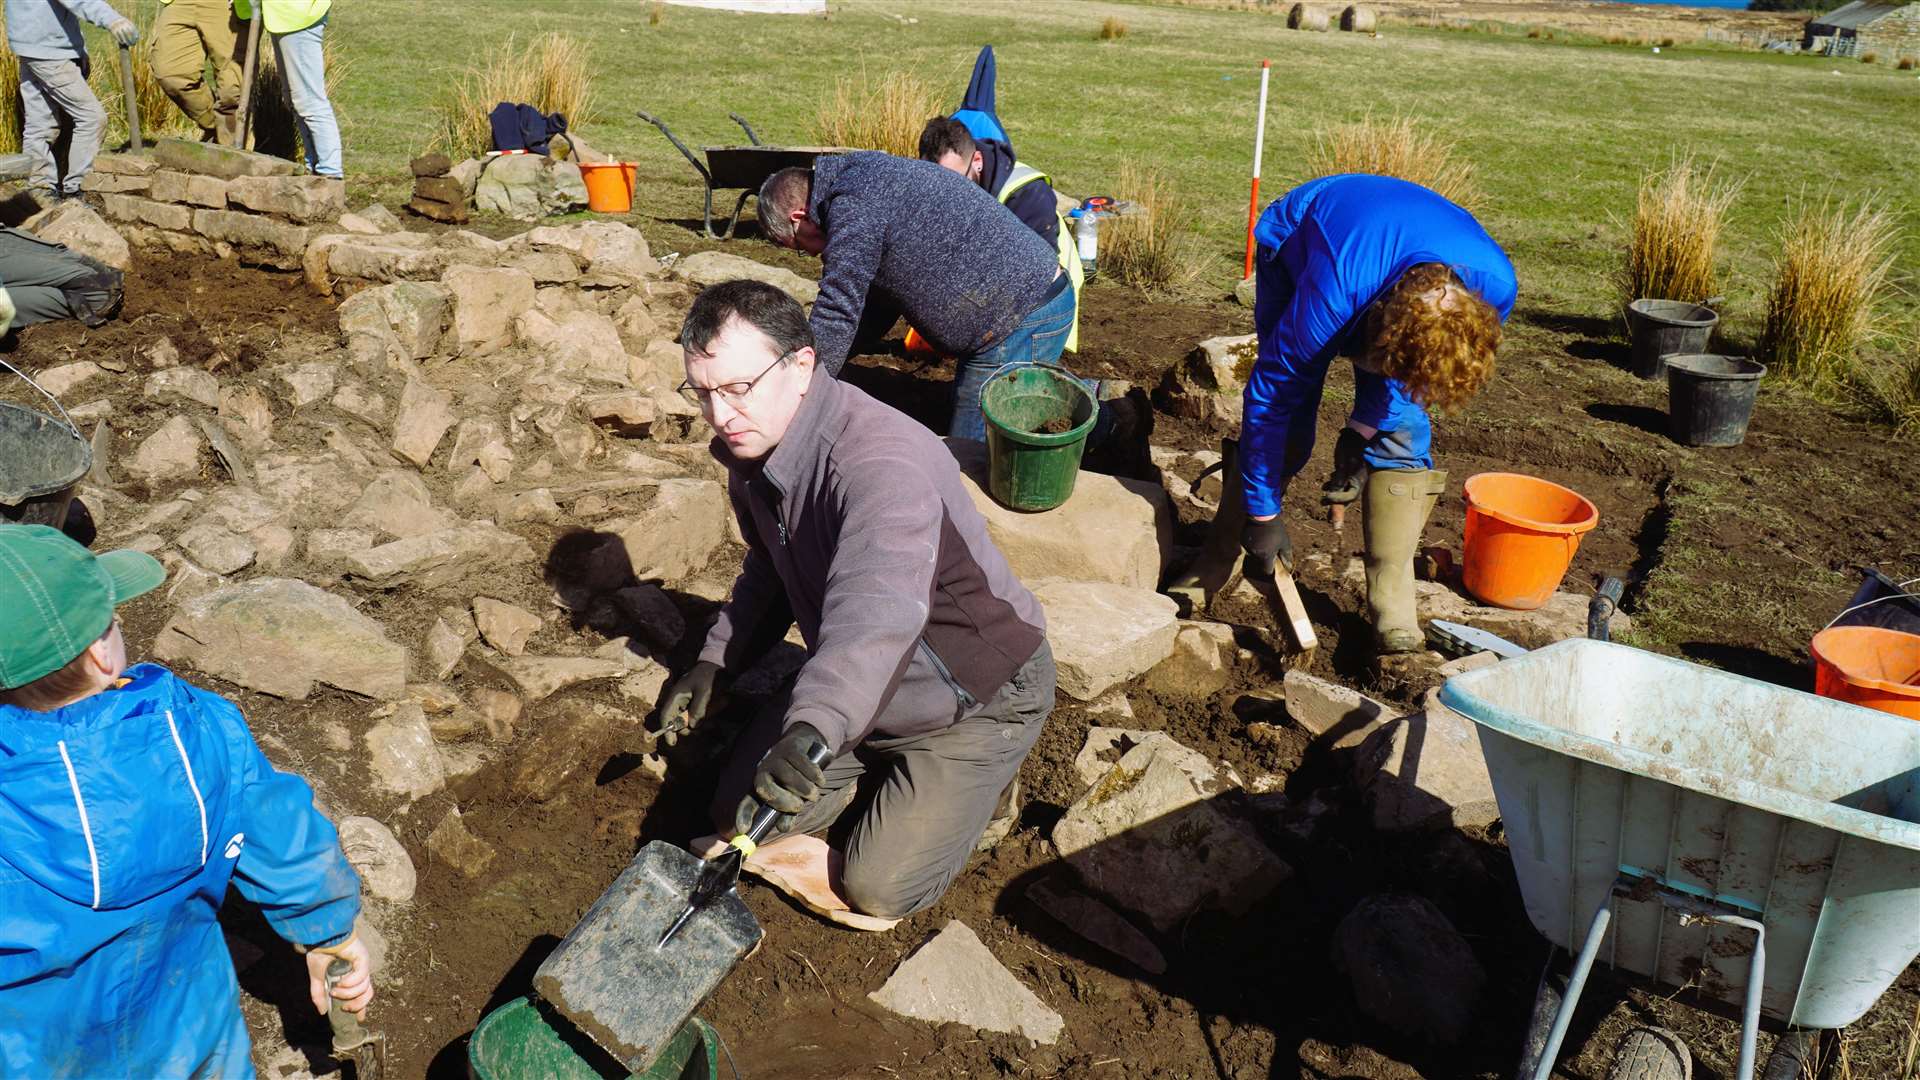 Local volunteer Rod Mann is one of many people helping at the dig and also worked on the nearby Swartigill Iron Age site that Yarrows Heritage is excavating as well. Picture: DGS